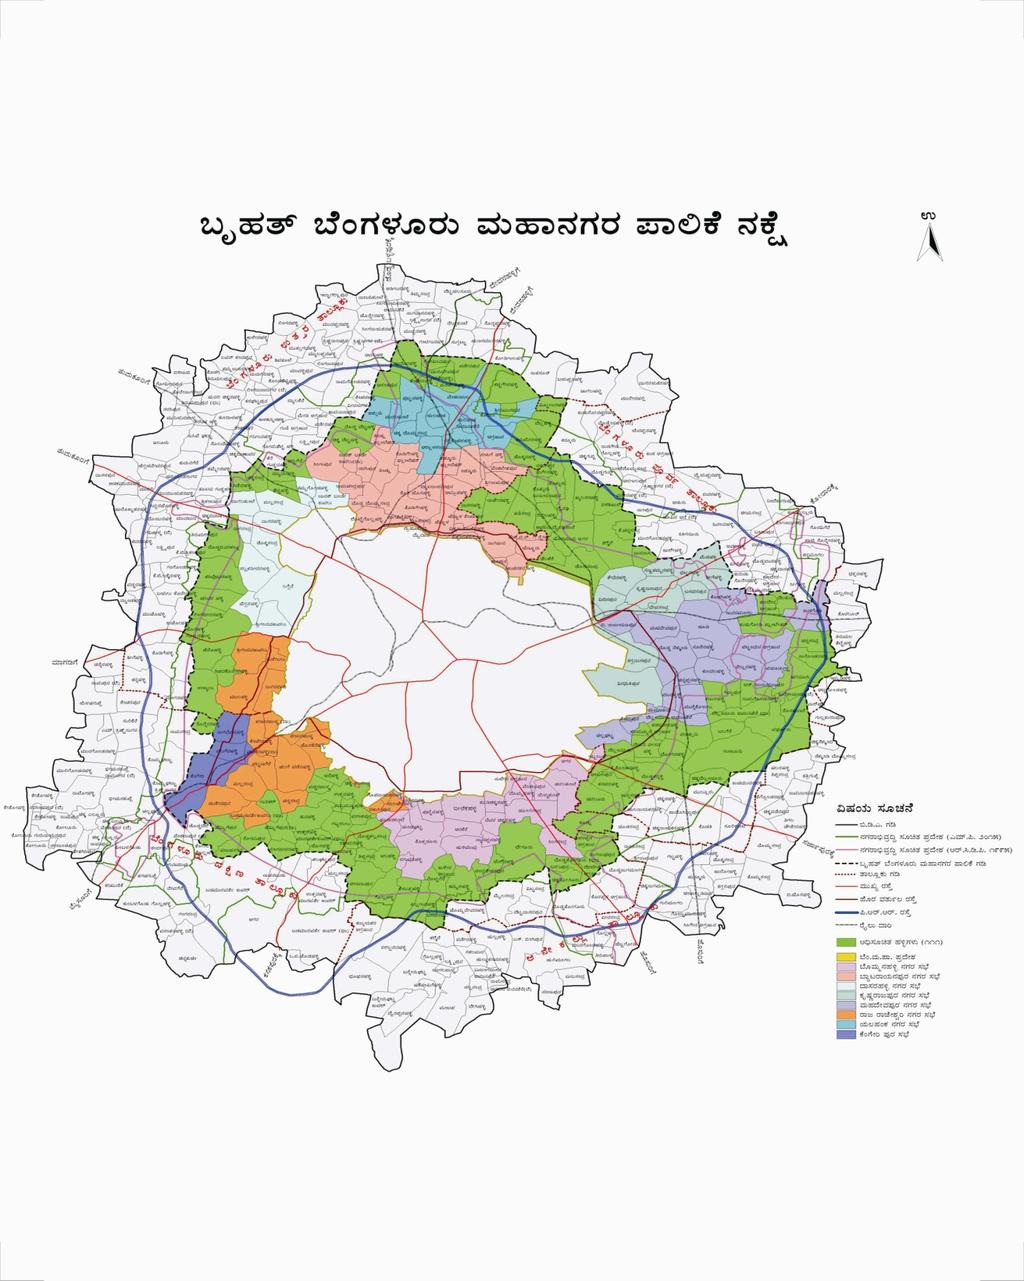 City Profile 2001 Census Population of BMP 43.01 lakhs (58.92-BBMP) Present estimated Population of BBMP 78.07 lakhs Present estimated slum population of BBMP 10.9 lakhs Present Area 793.47 sq.